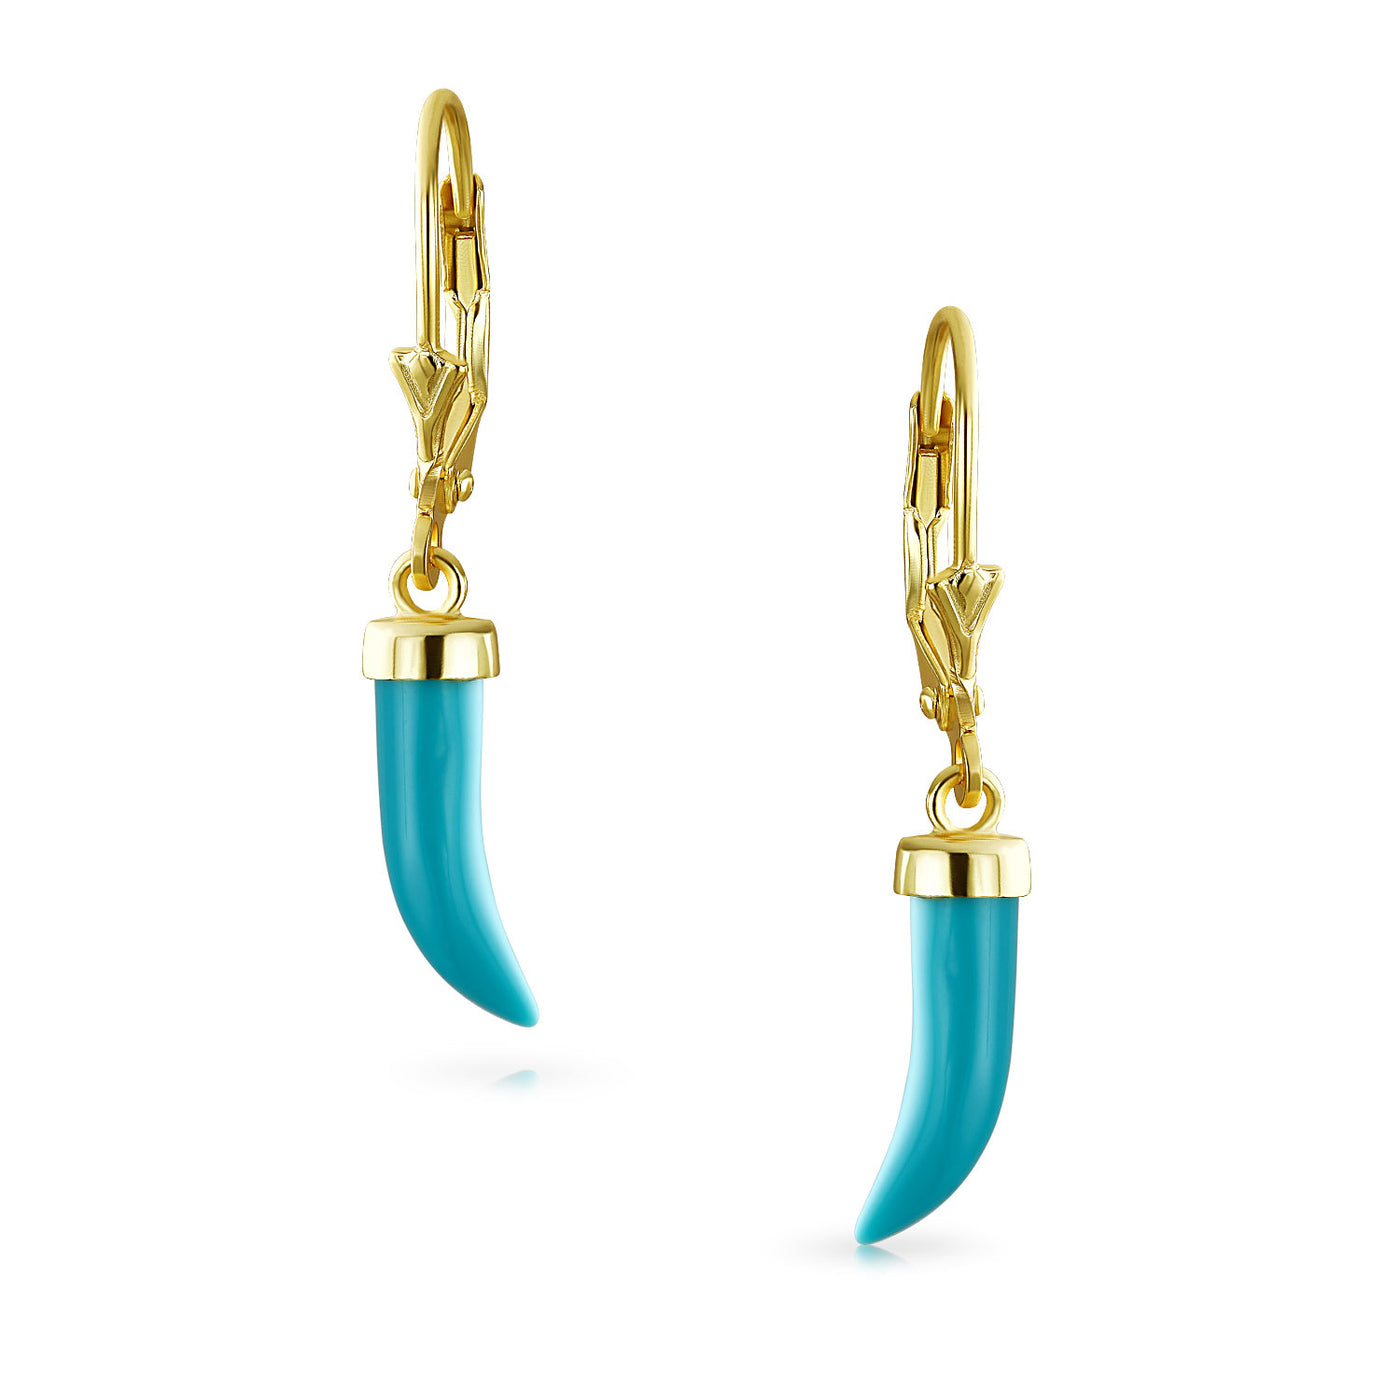 Horn Tooth Turquoise Dangle Western Earrings Gold Plated .925 Silver